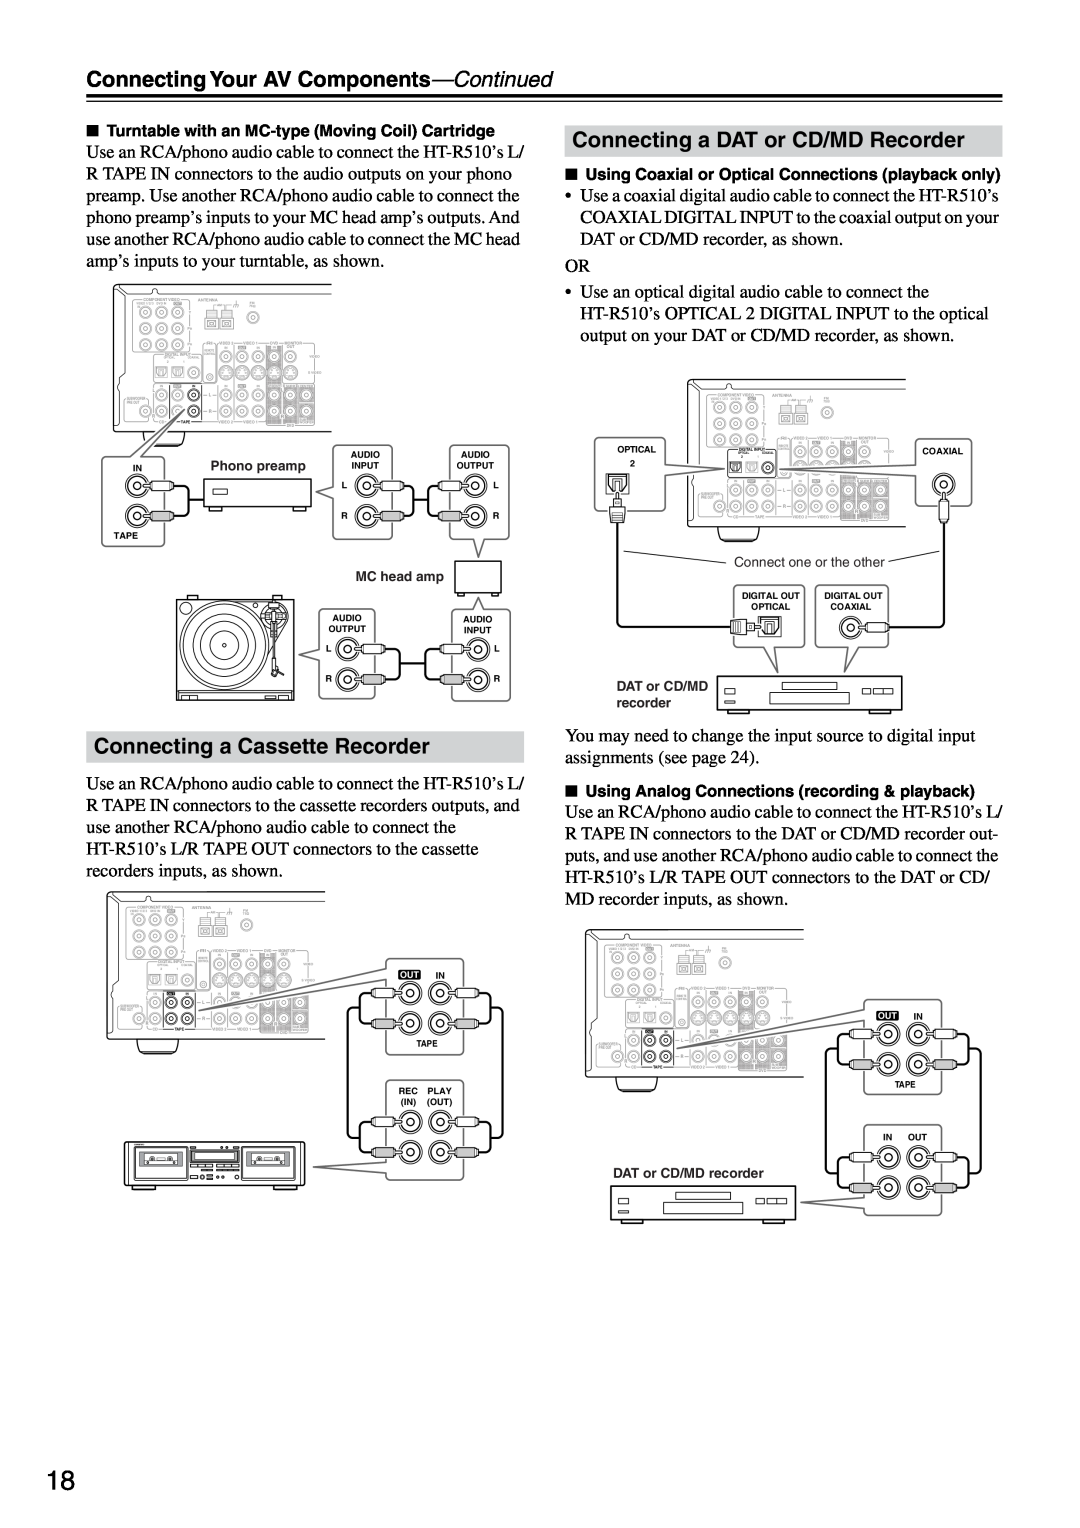 Onkyo HT-R510 Connecting a DAT or CD/MD Recorder, Connecting a Cassette Recorder, Connecting Your AV Components-Continued 